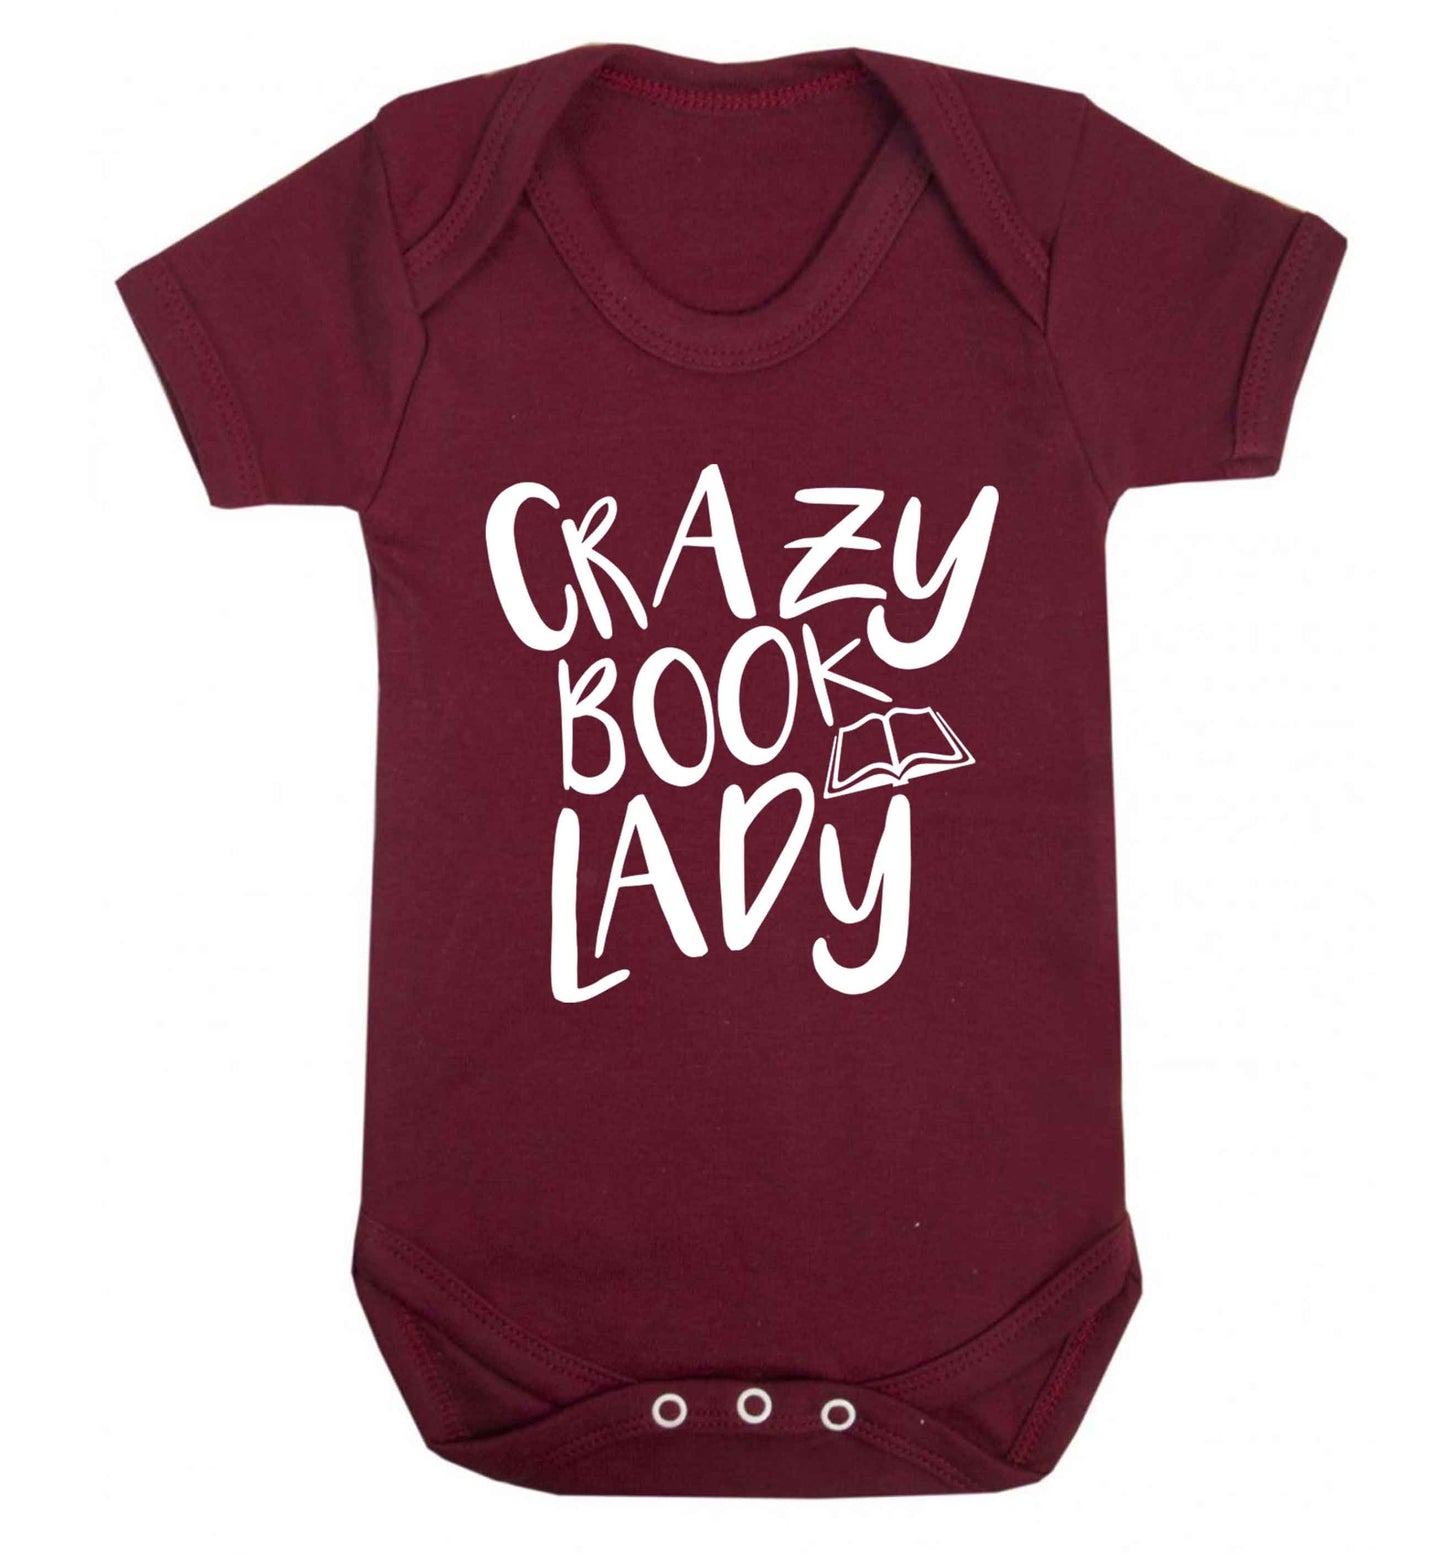 Crazy book lady Baby Vest maroon 18-24 months